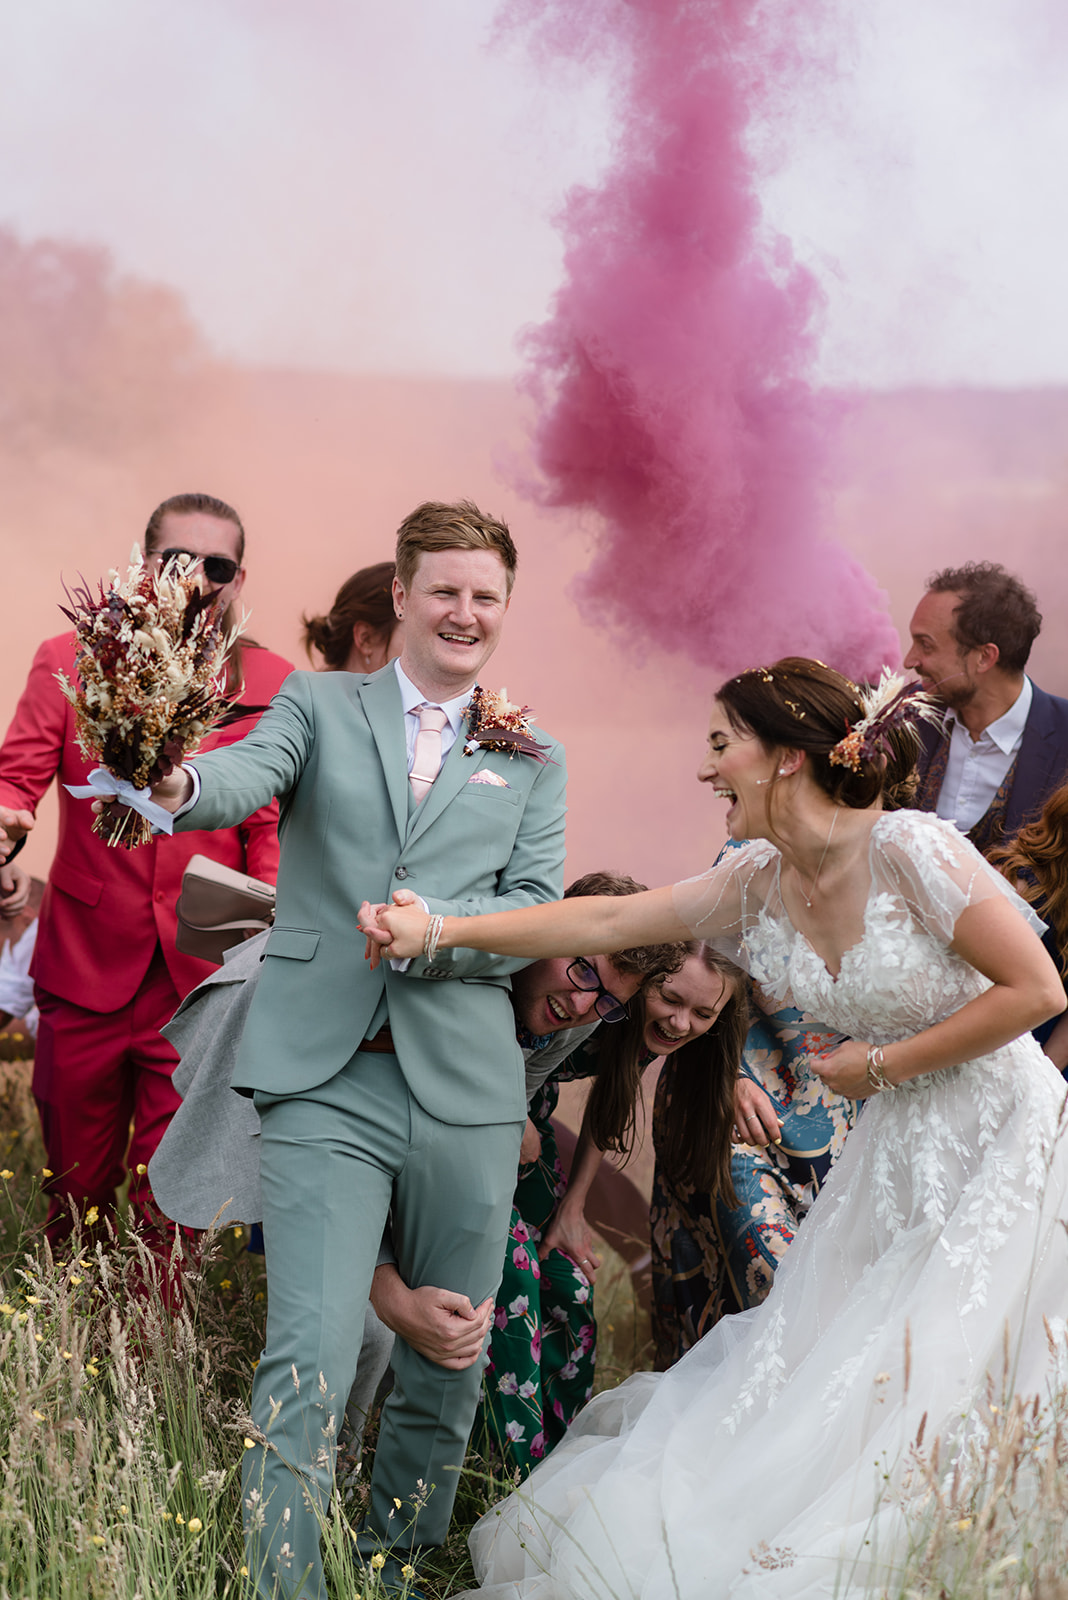 smoke grenades for the bridal party